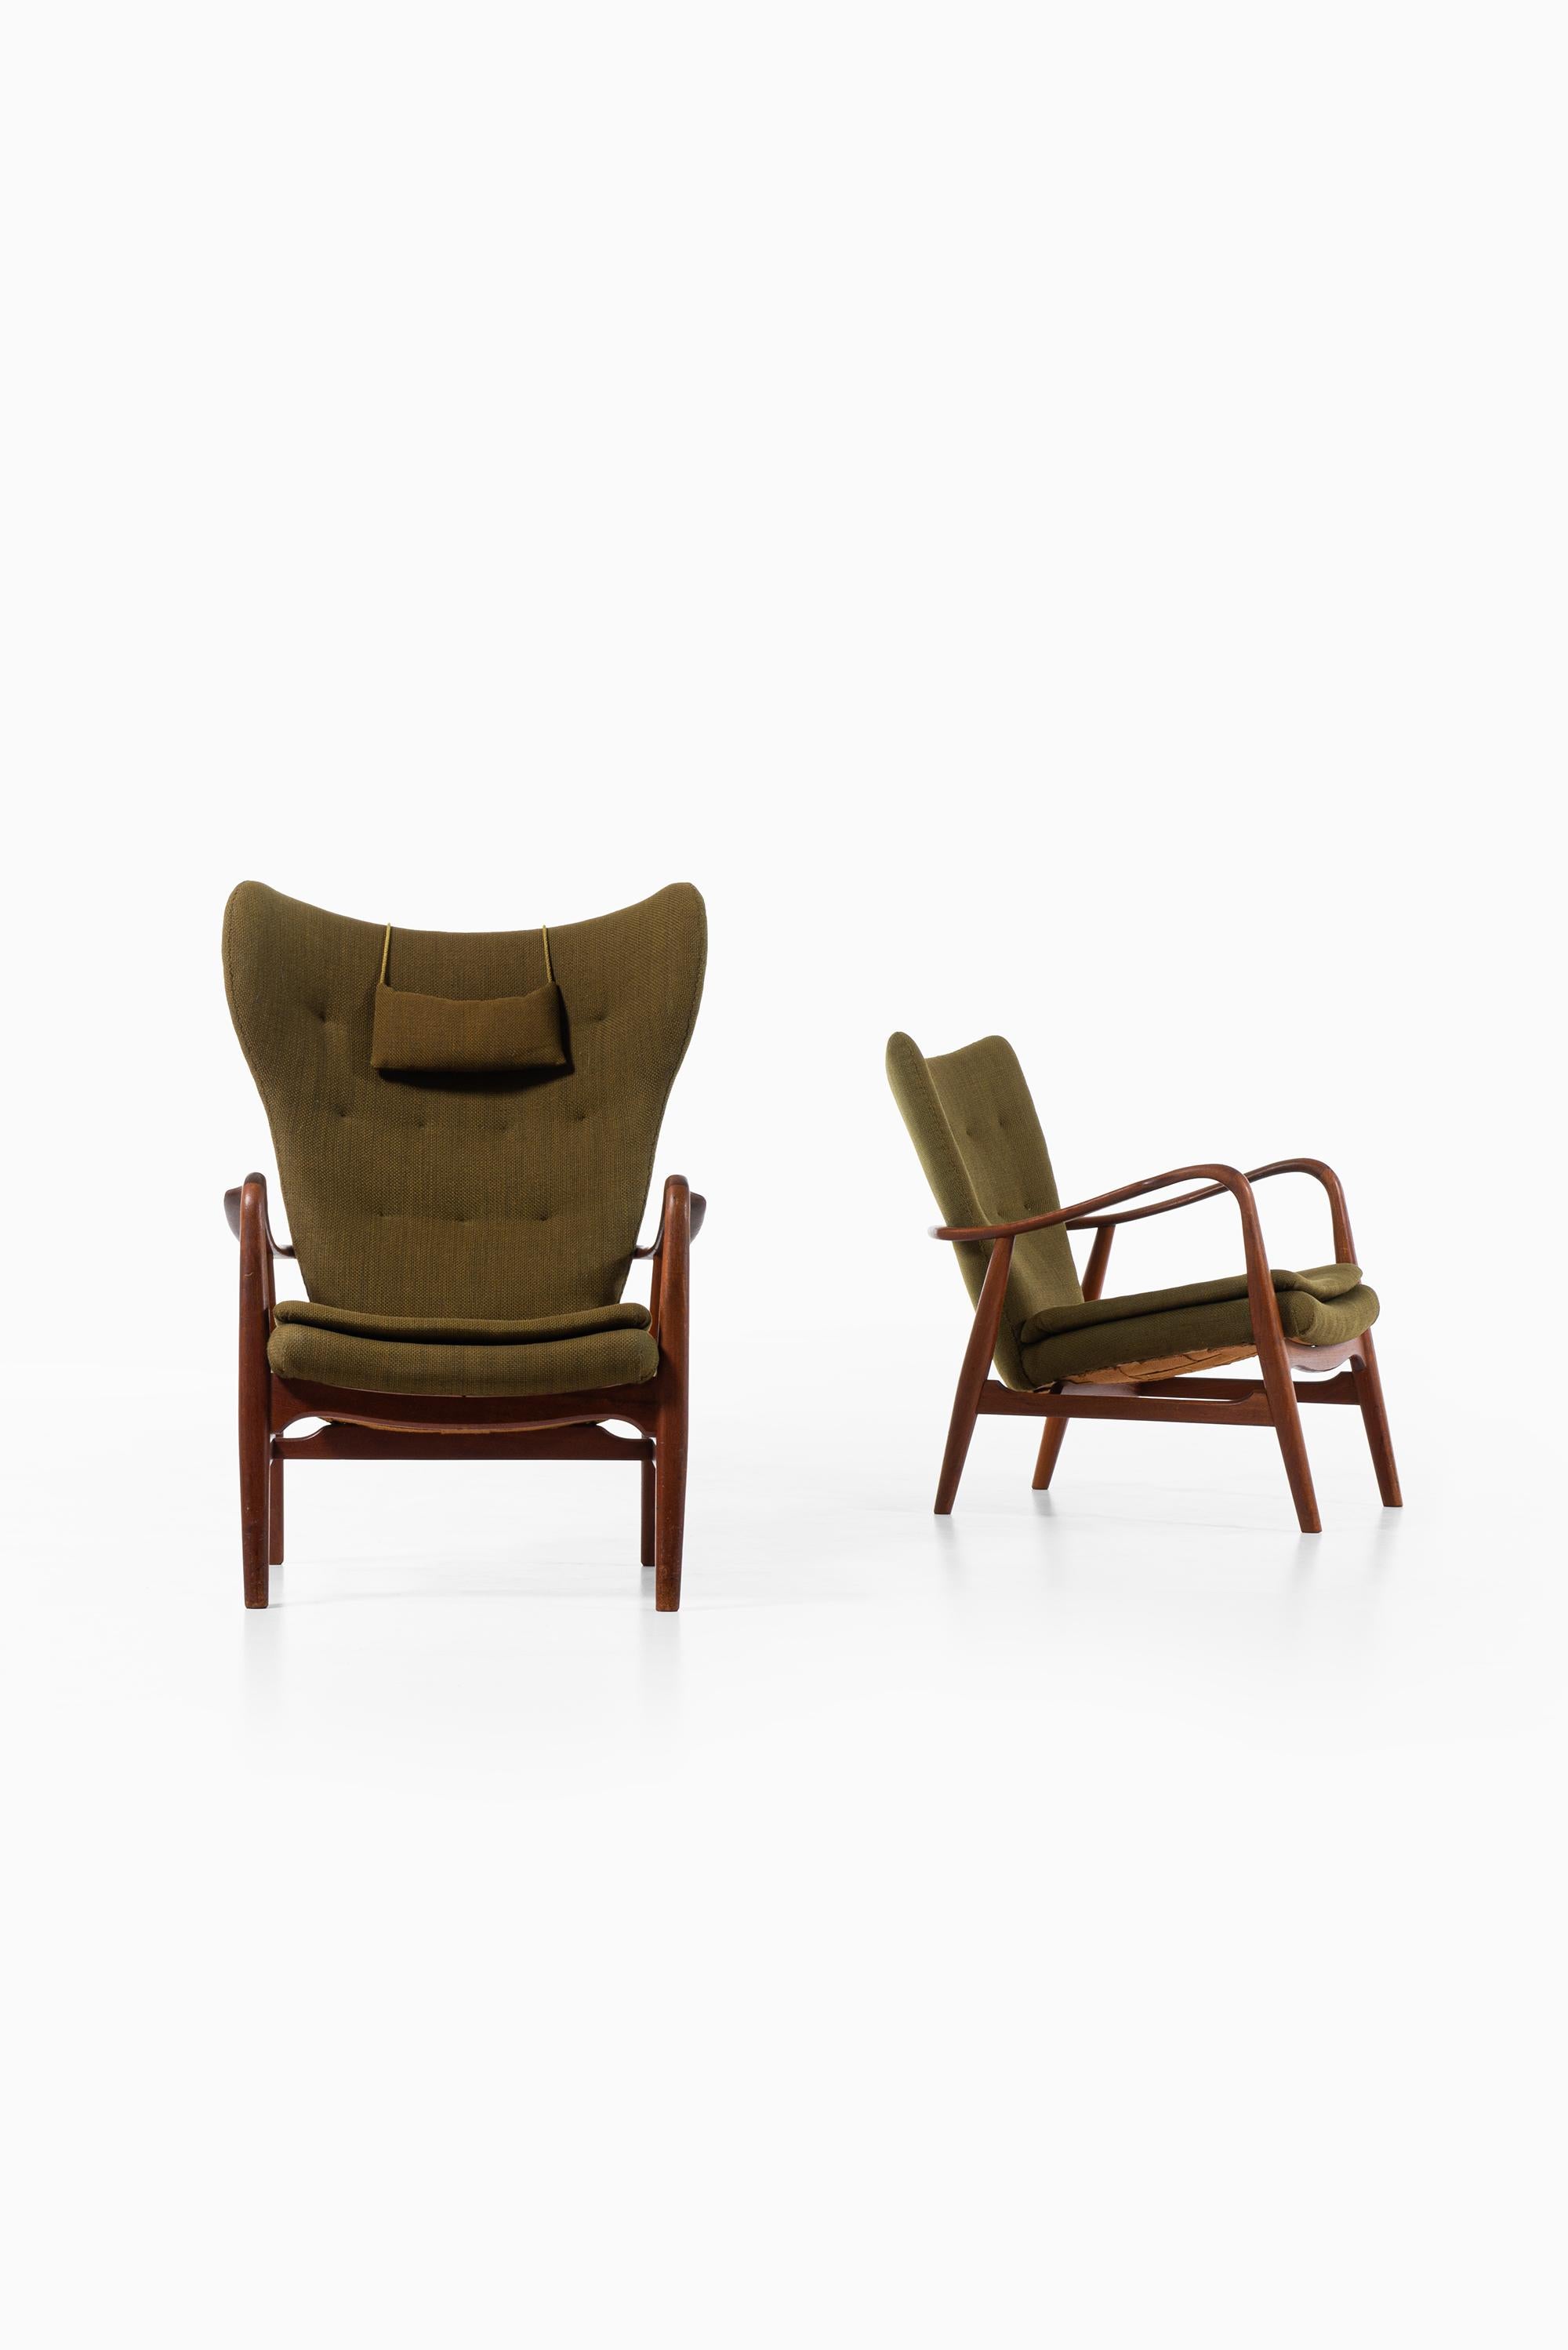 Danish Ib Madsen & Acton Schubell Easy Chairs Produced by Madsen & Schubell in Denmark